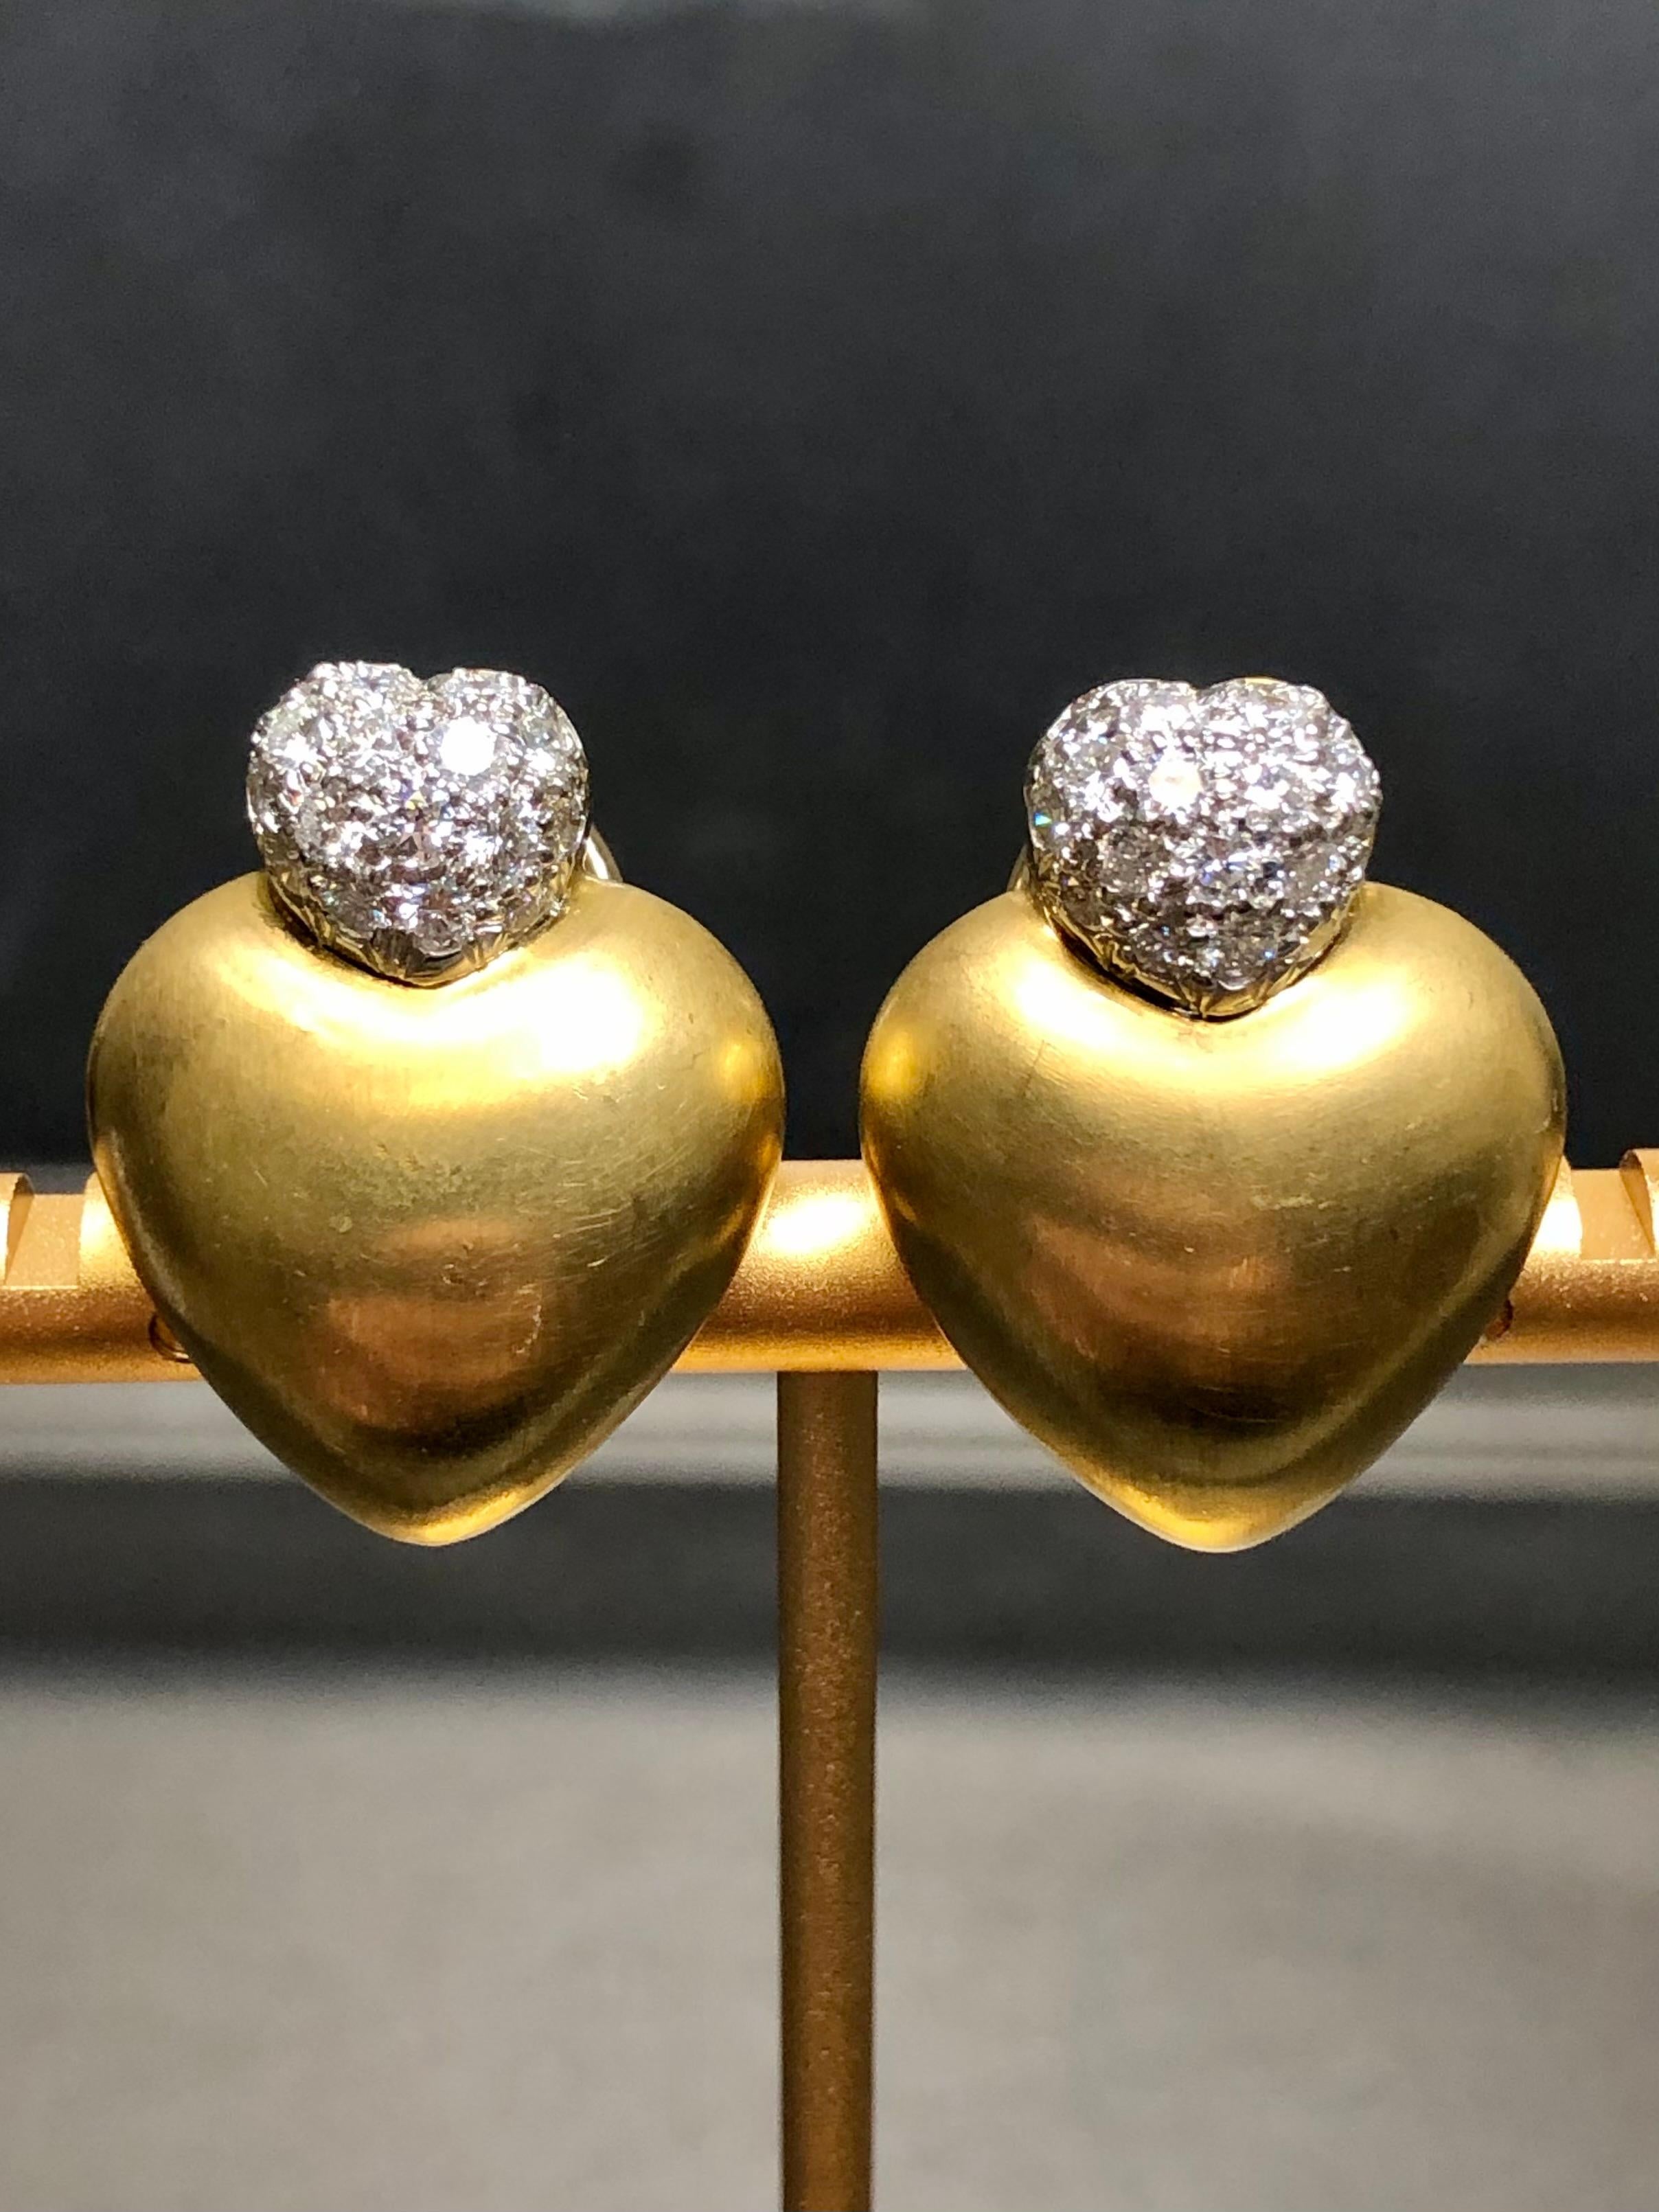 An original pair of clip-on huggies by designer Marlene Stowe done in 18K yellow gold and set with approximately 1.50cttw in G-H color Vs1-2 clarity round diamonds.


Dimensions/Weight:

Earrings measure 1” by .75” in diameter and weigh